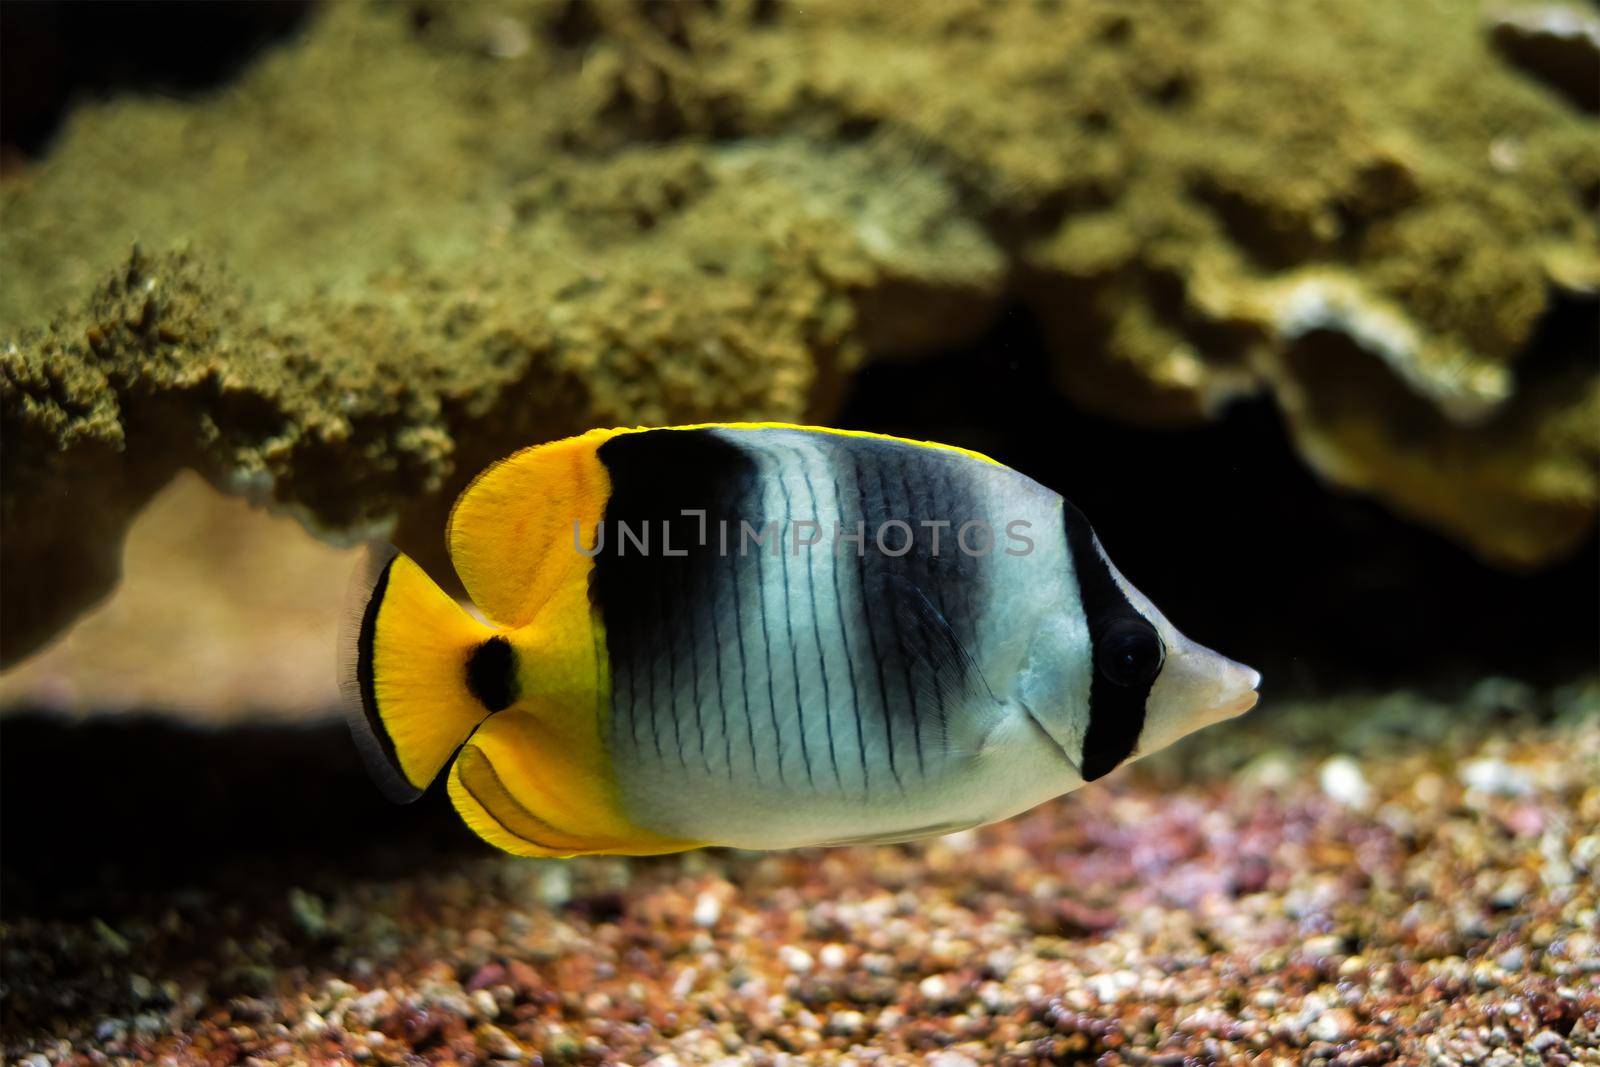 Pacific double-saddle butterflyfish Chaetodon ulietensis fish underwater in sea by dimol